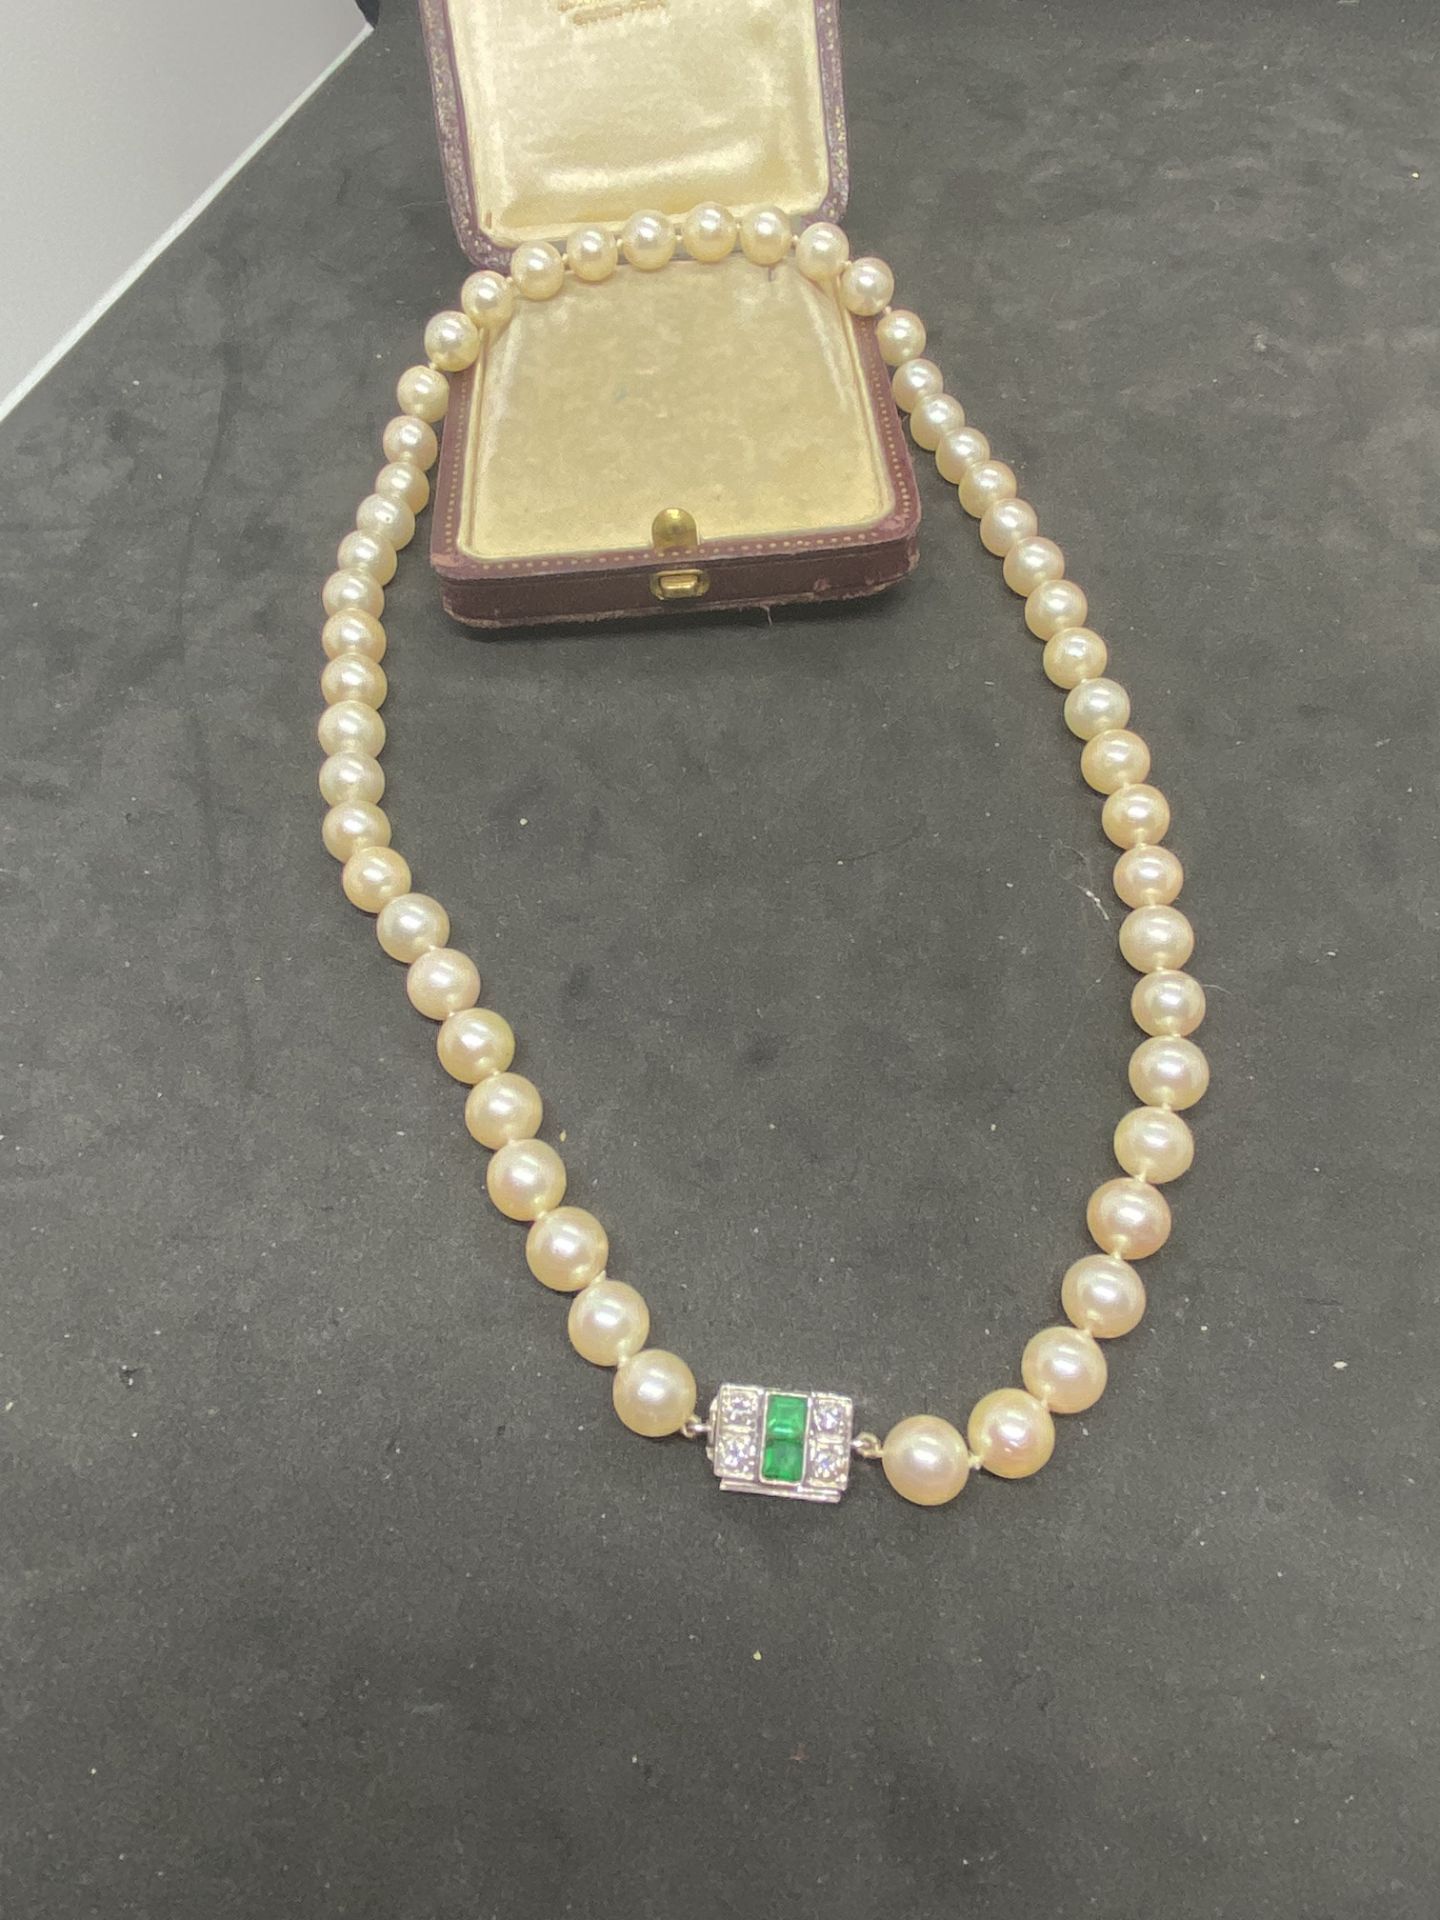 VINTAGE PEARL NECKLACE WITH WHITE METAL CLASP SET WITH EMERALDS & DIAMONDS (TESTED AS WHITE GOLD) - Image 2 of 8